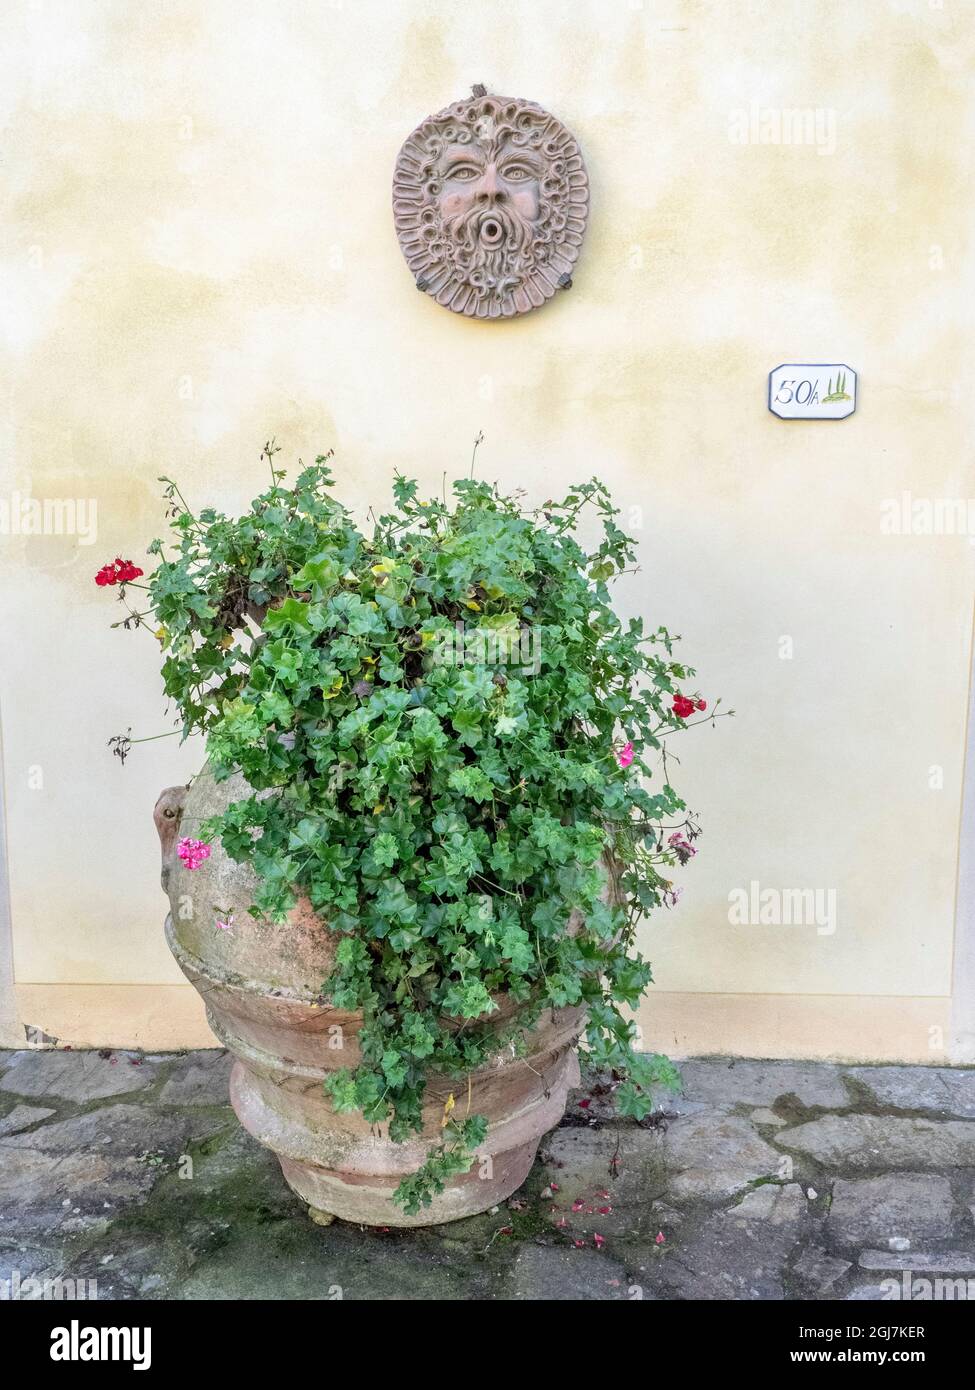 Europe, Italy, Chianti. Potted ivy geranium against a stucco wall with hanging ceramic face. Stock Photo